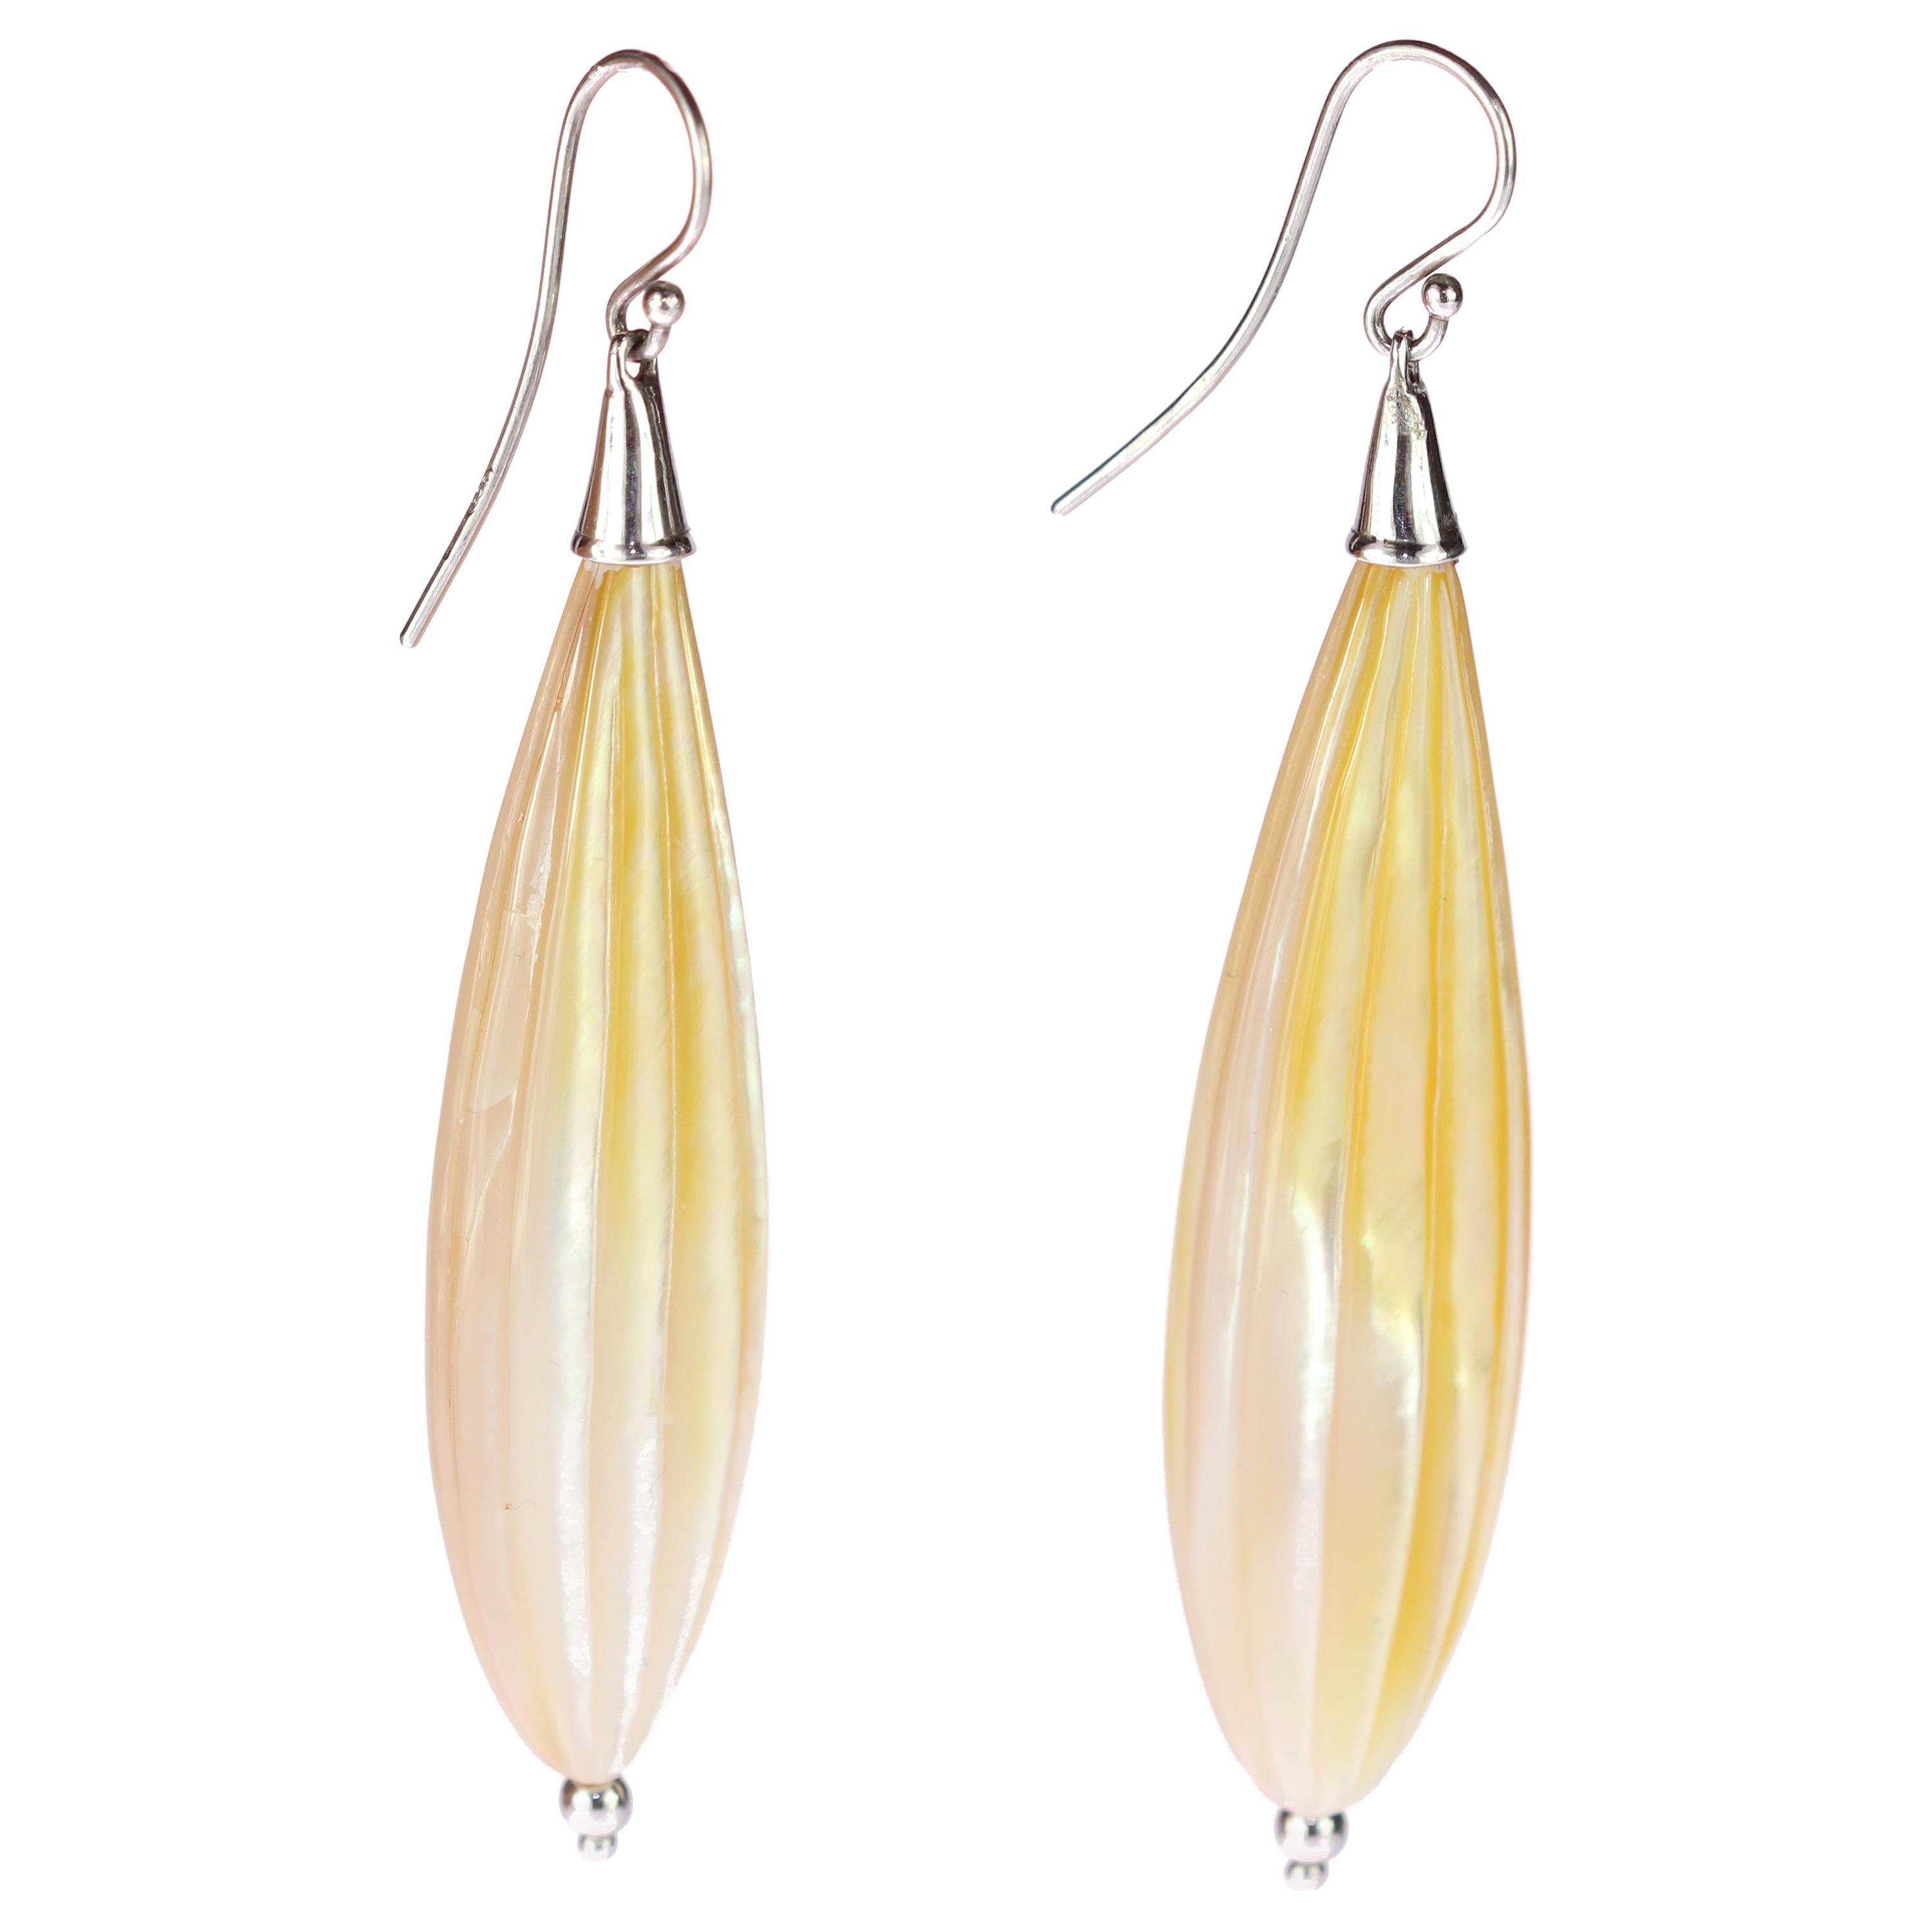 Mother of Pearl Natural Color Carved Tear Drop Silver Dangle Handmade Earrings